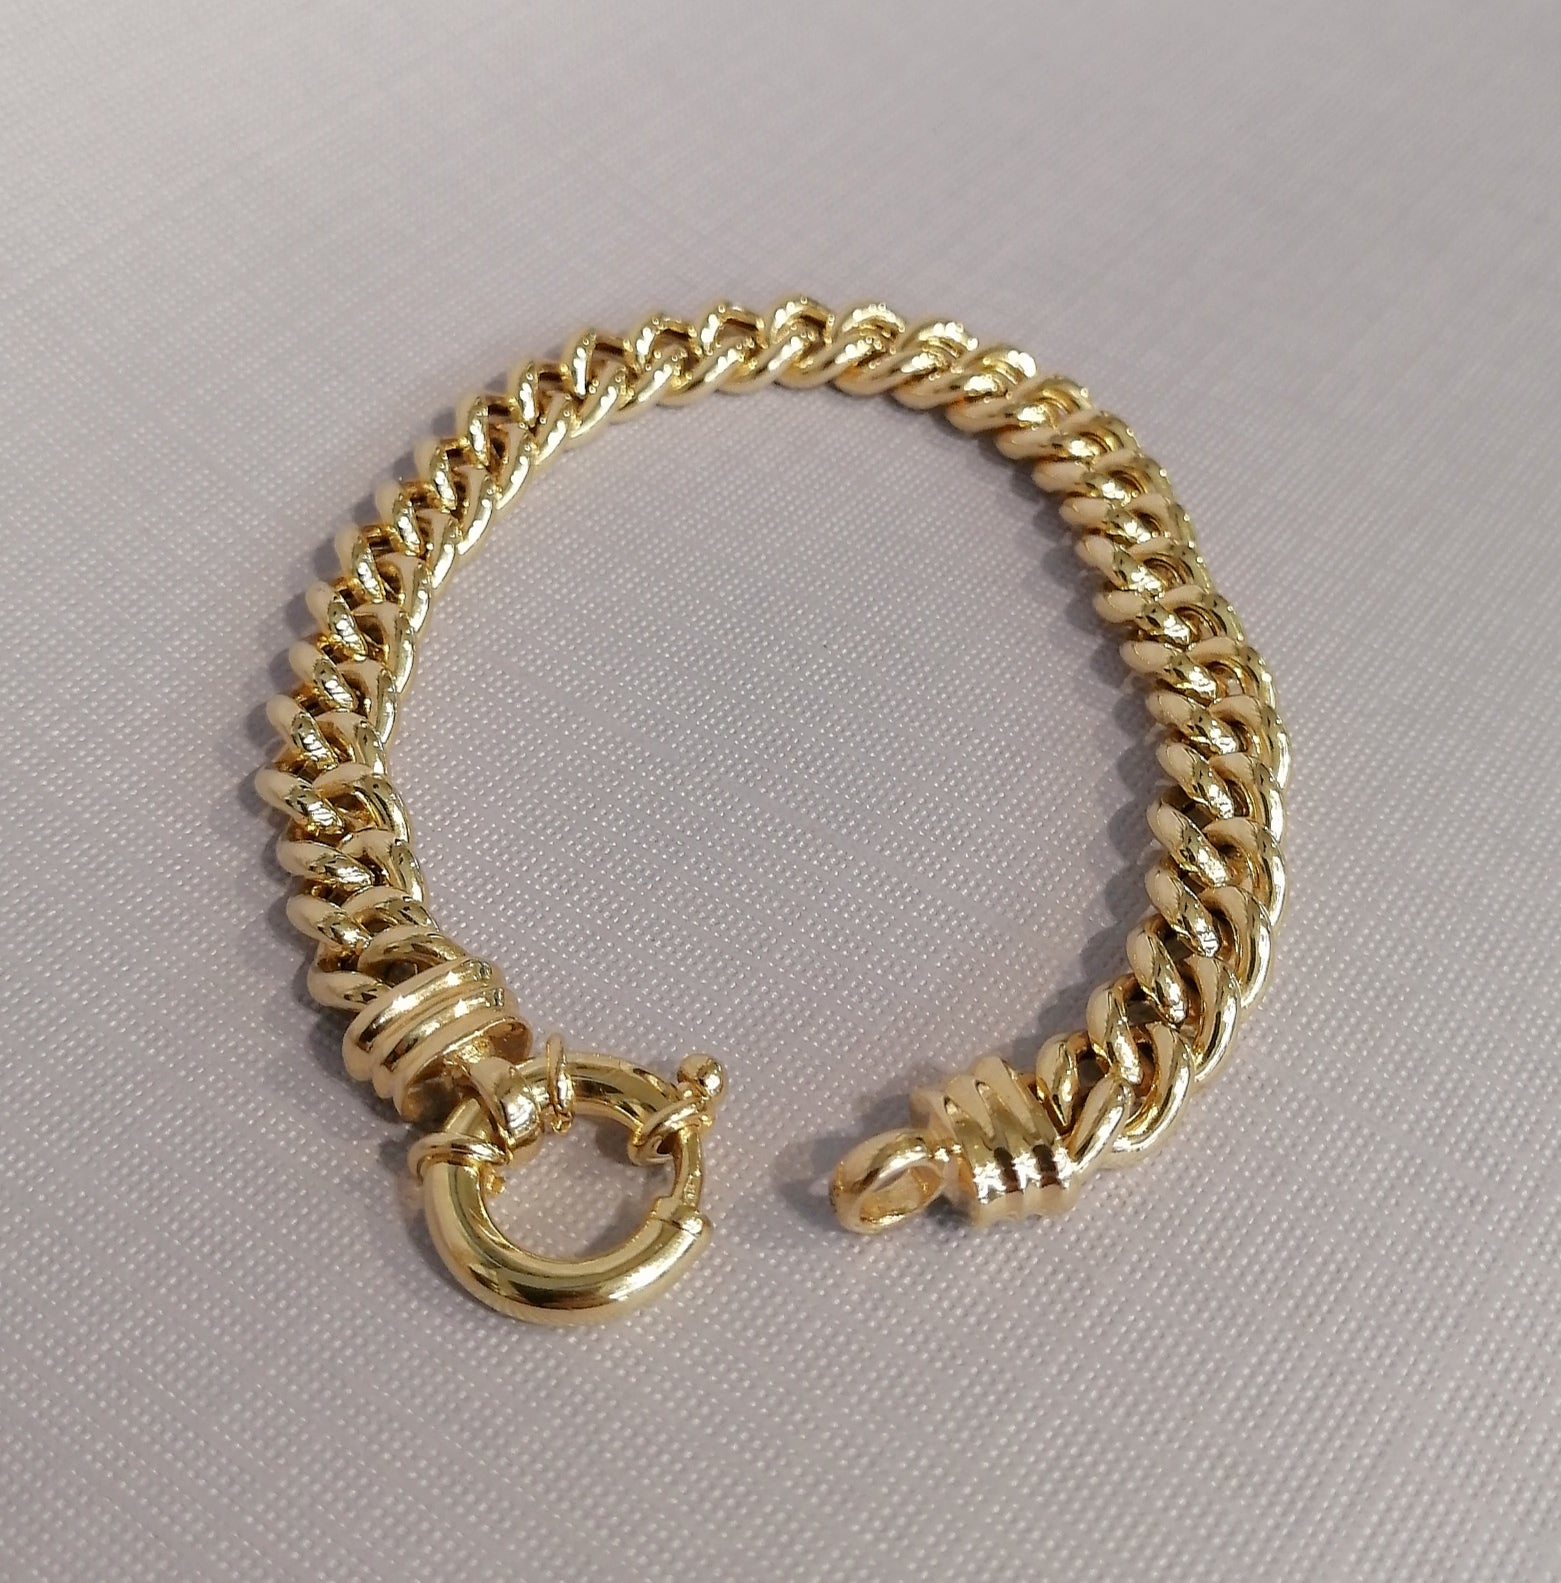 New 9ct gold 8 inch curb Bracelet